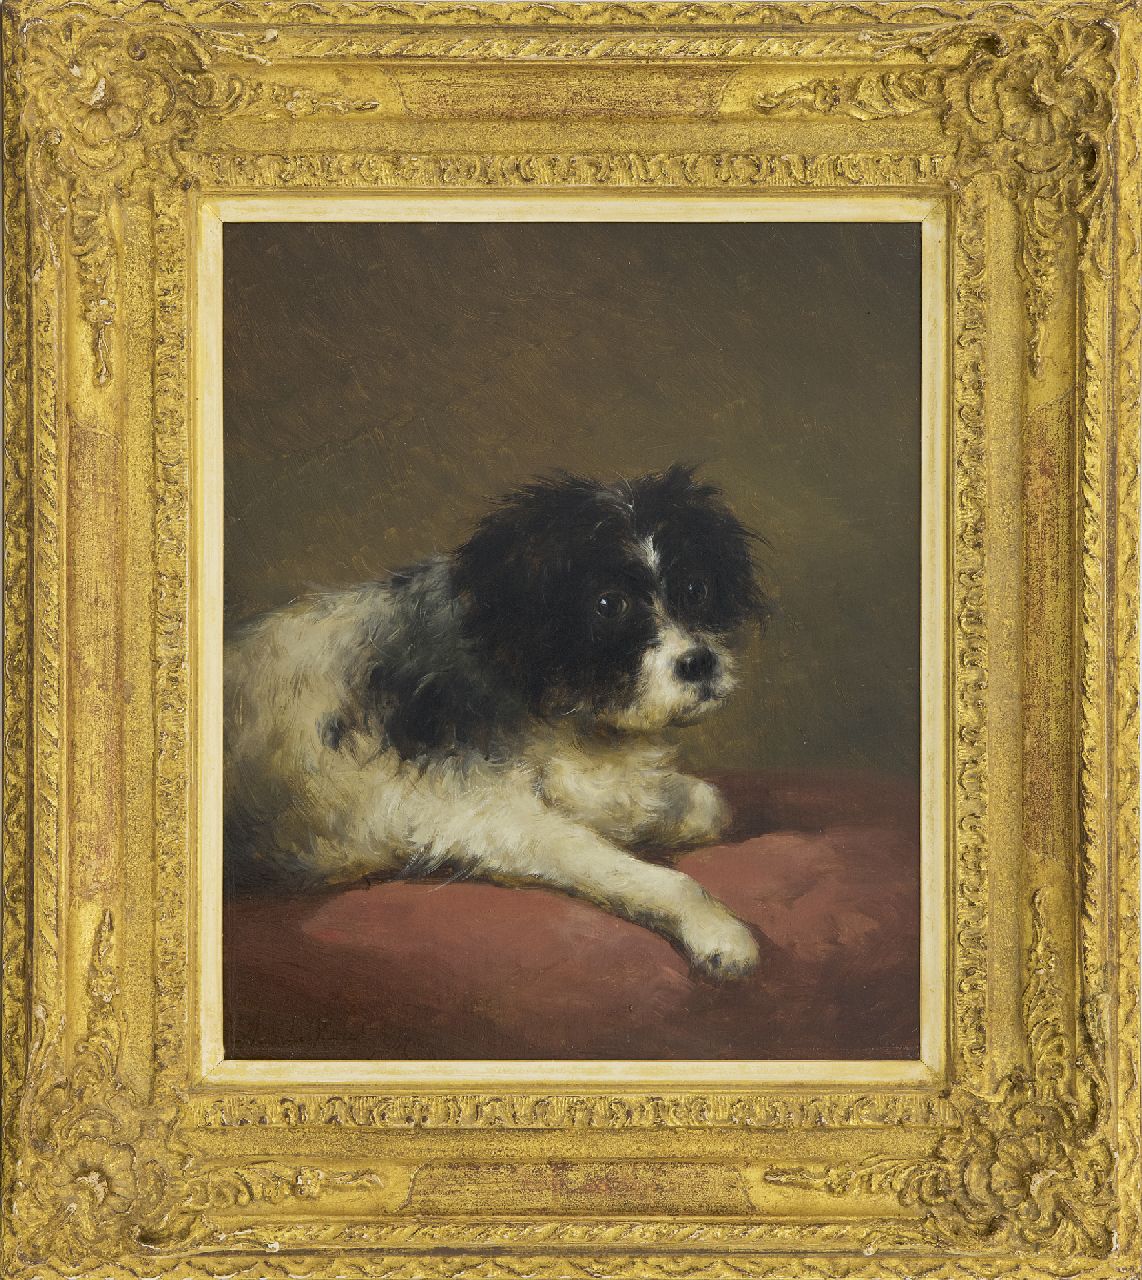 Schelfhout A.  | Andreas Schelfhout, A portrait of a dog lying on a red cushion, oil on panel 32.1 x 27.3 cm, signed l.l. and dated '47